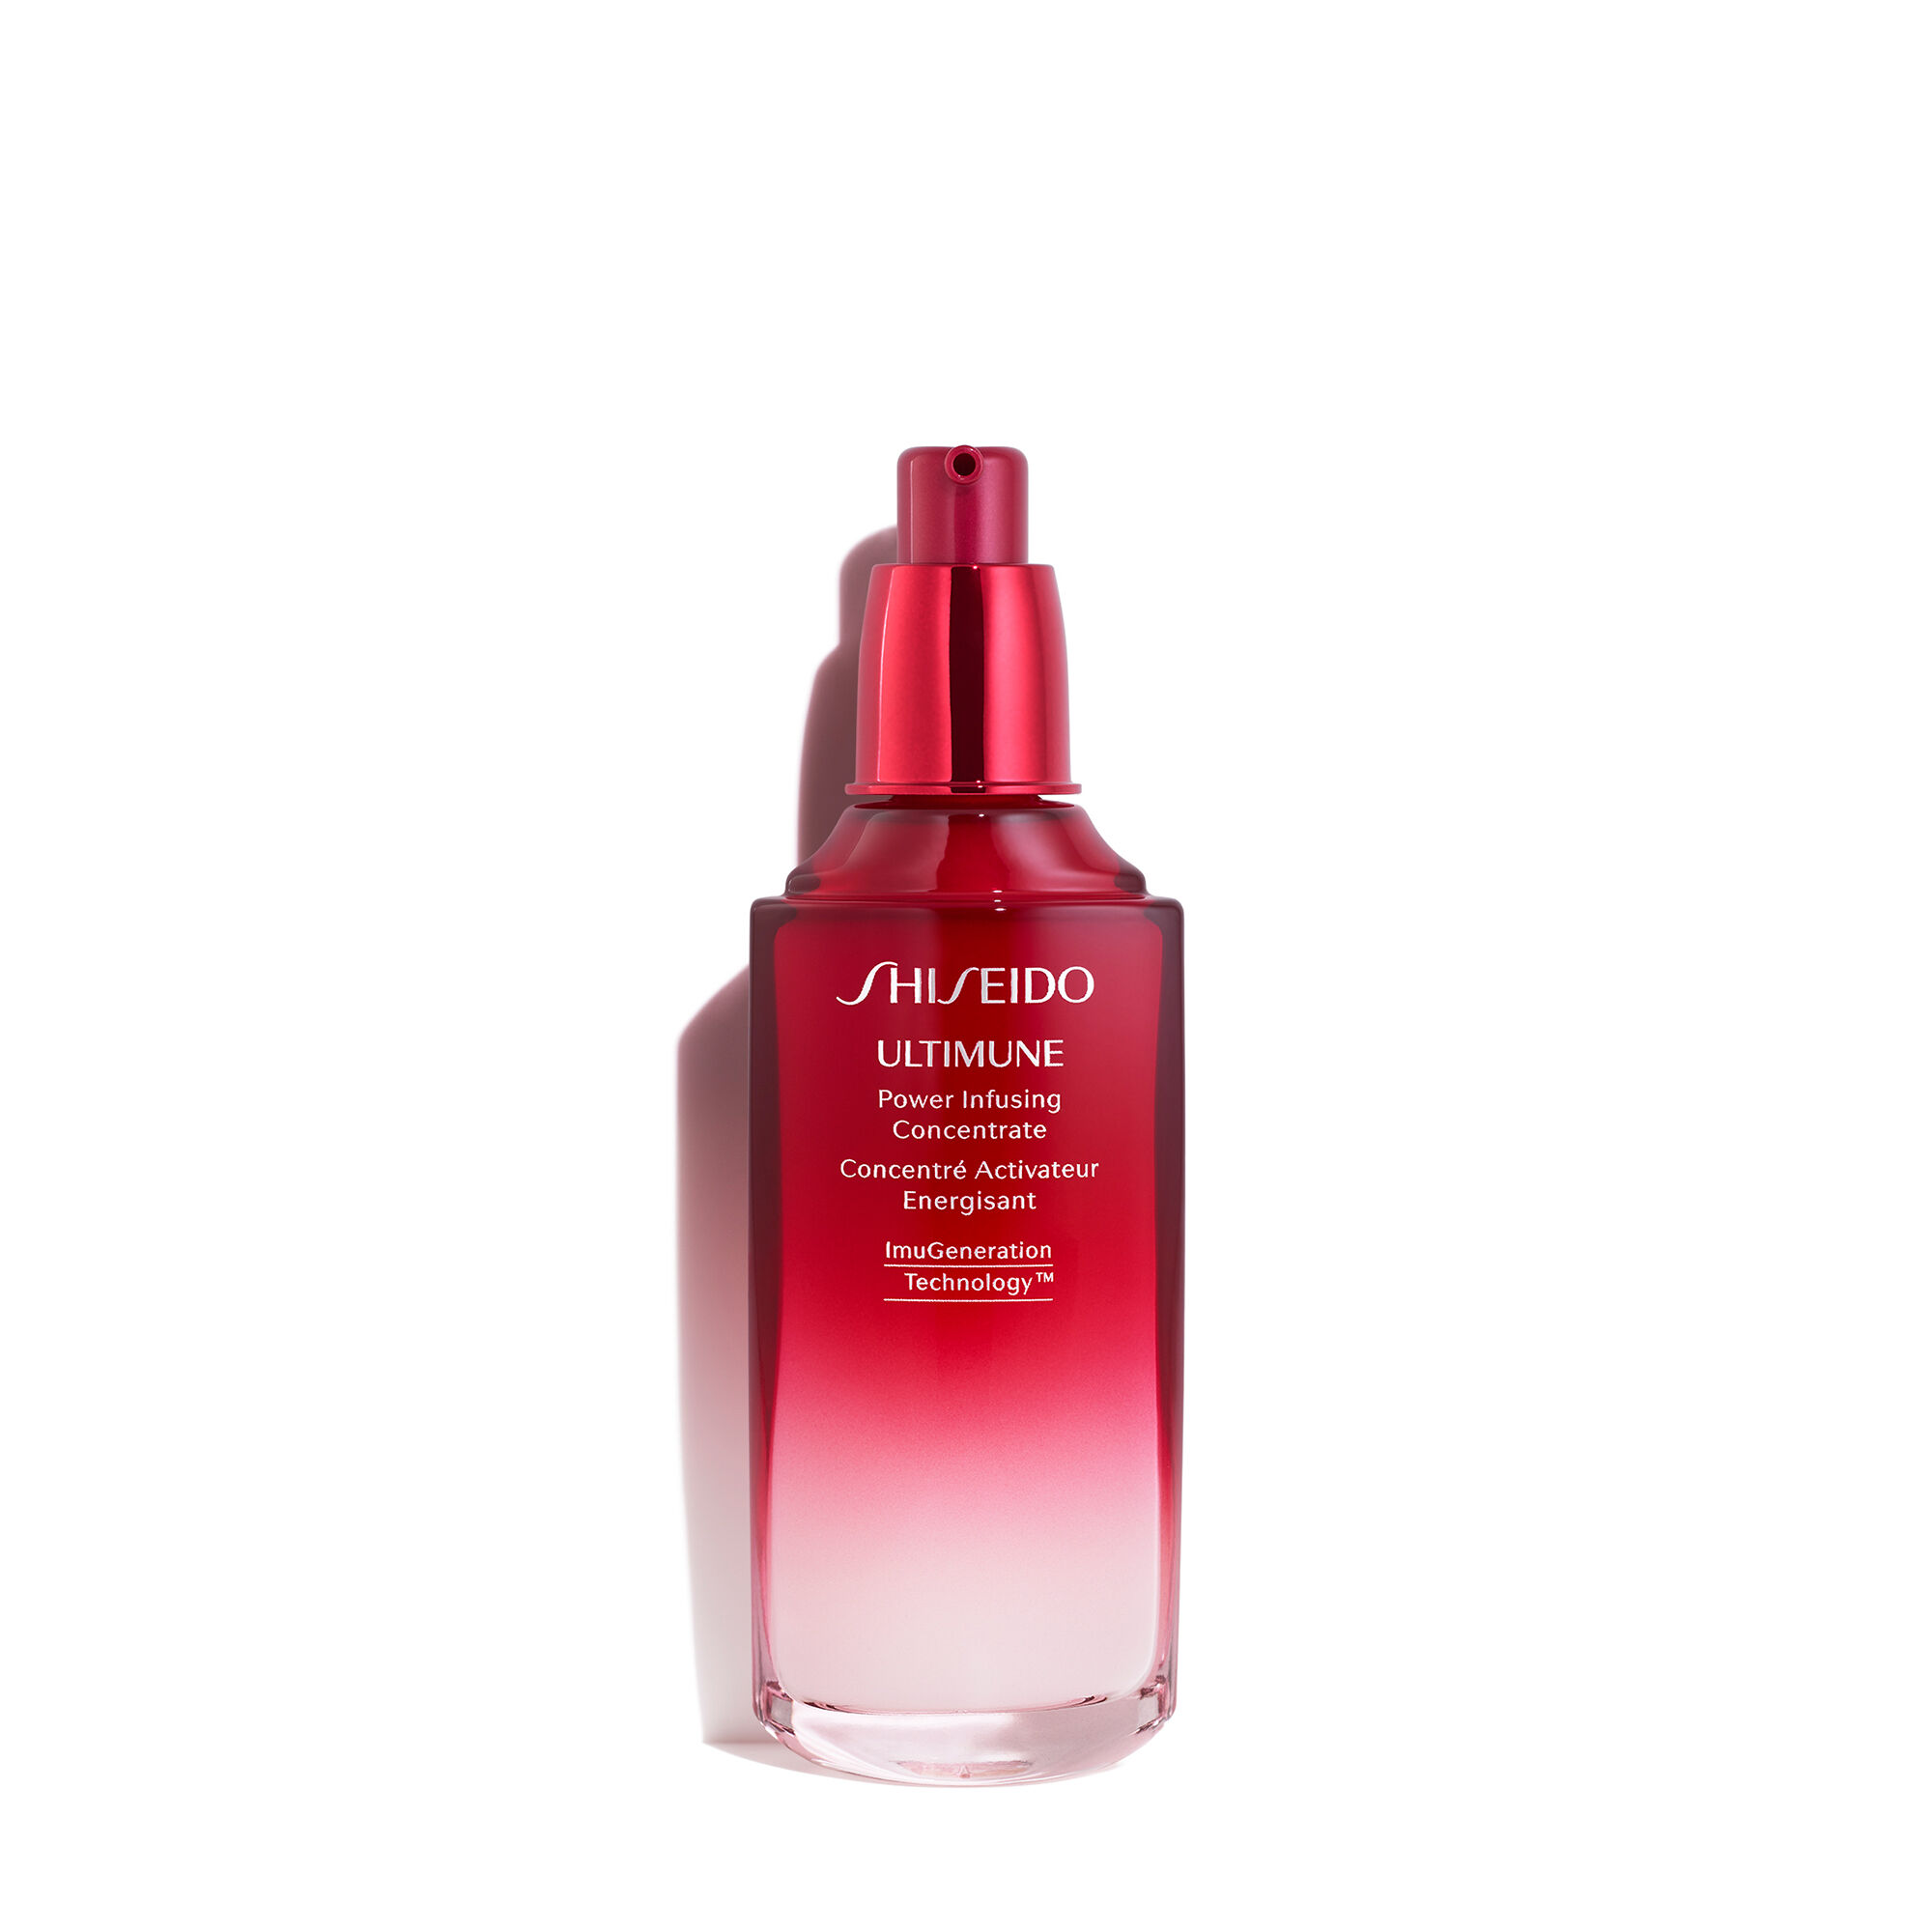 Shiseido power infusing concentrate. Концентрат Shiseido Ultimune Power infusing Concentrate. Шисейдо сыворотка для лица. Шисейдо Essential Energy Eye Definer. Концентрат для лица Shiseido Ultimune.